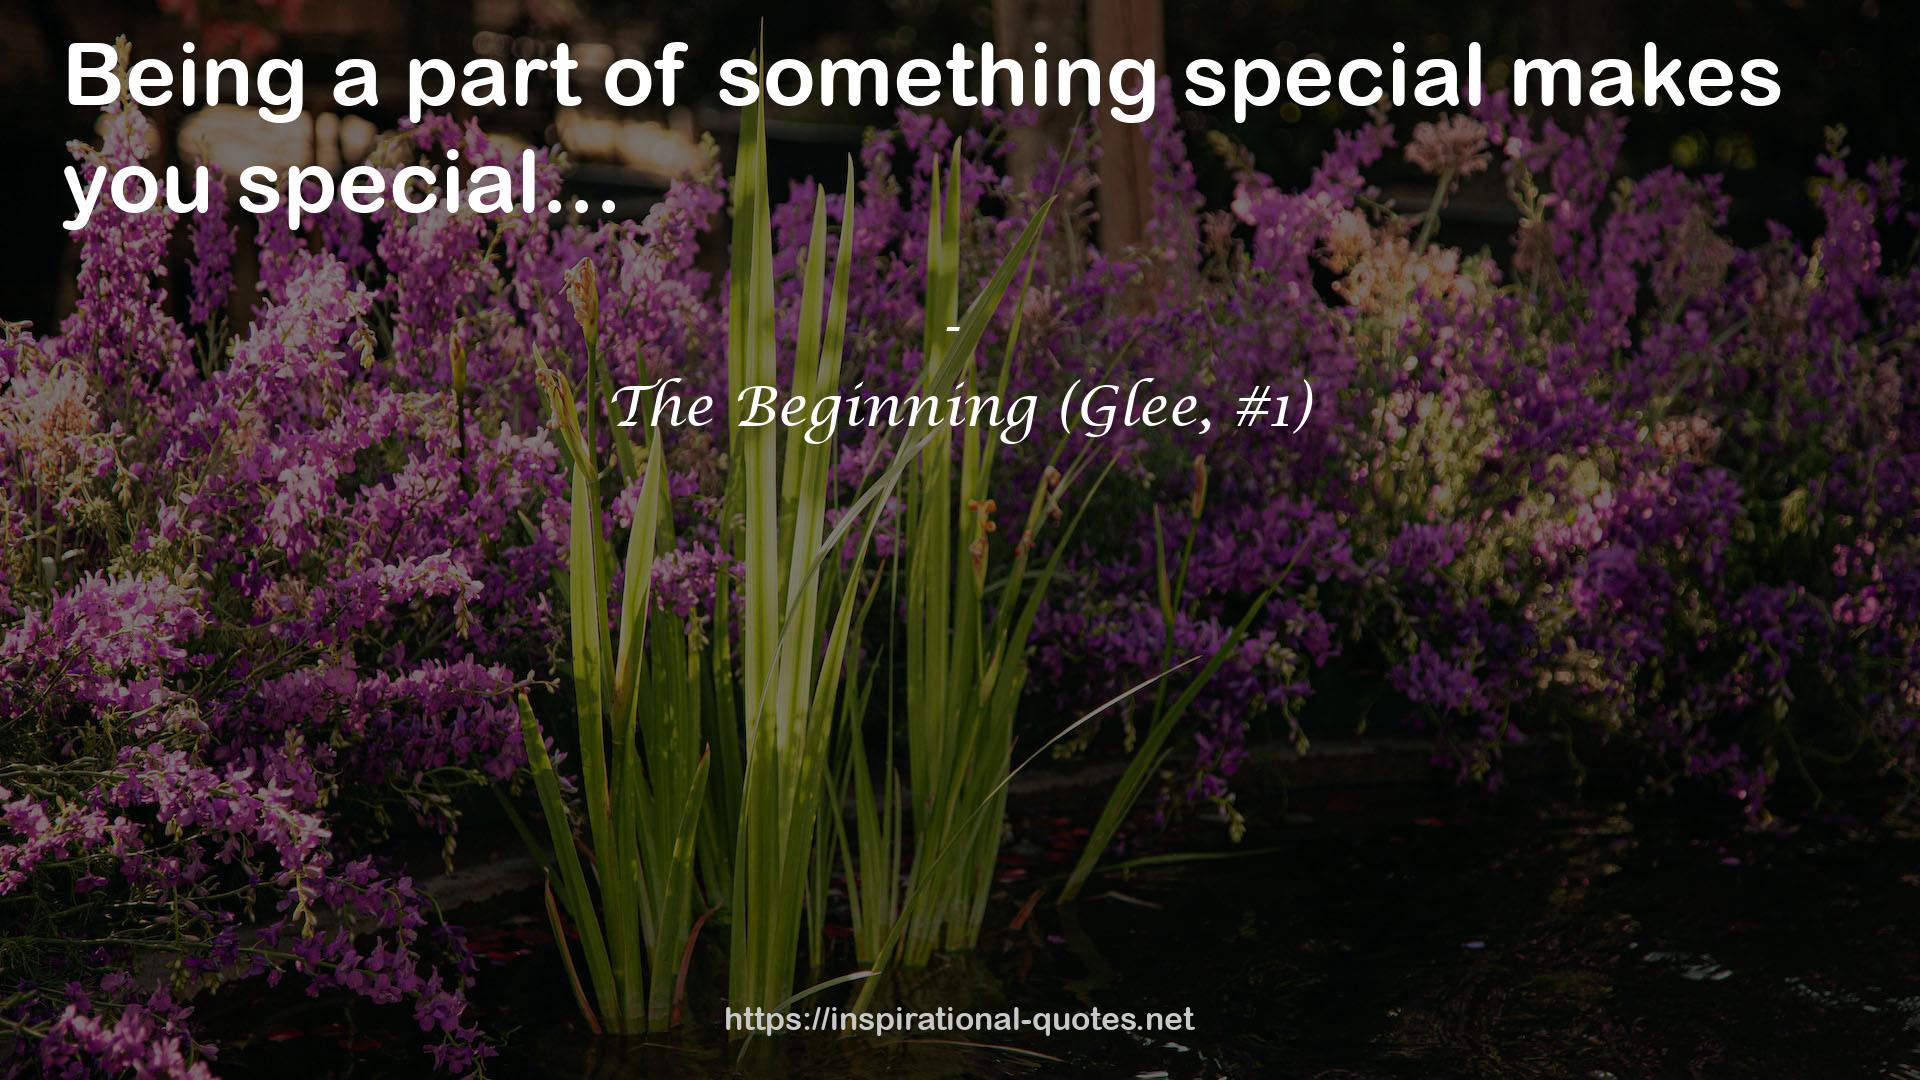 The Beginning (Glee, #1) QUOTES